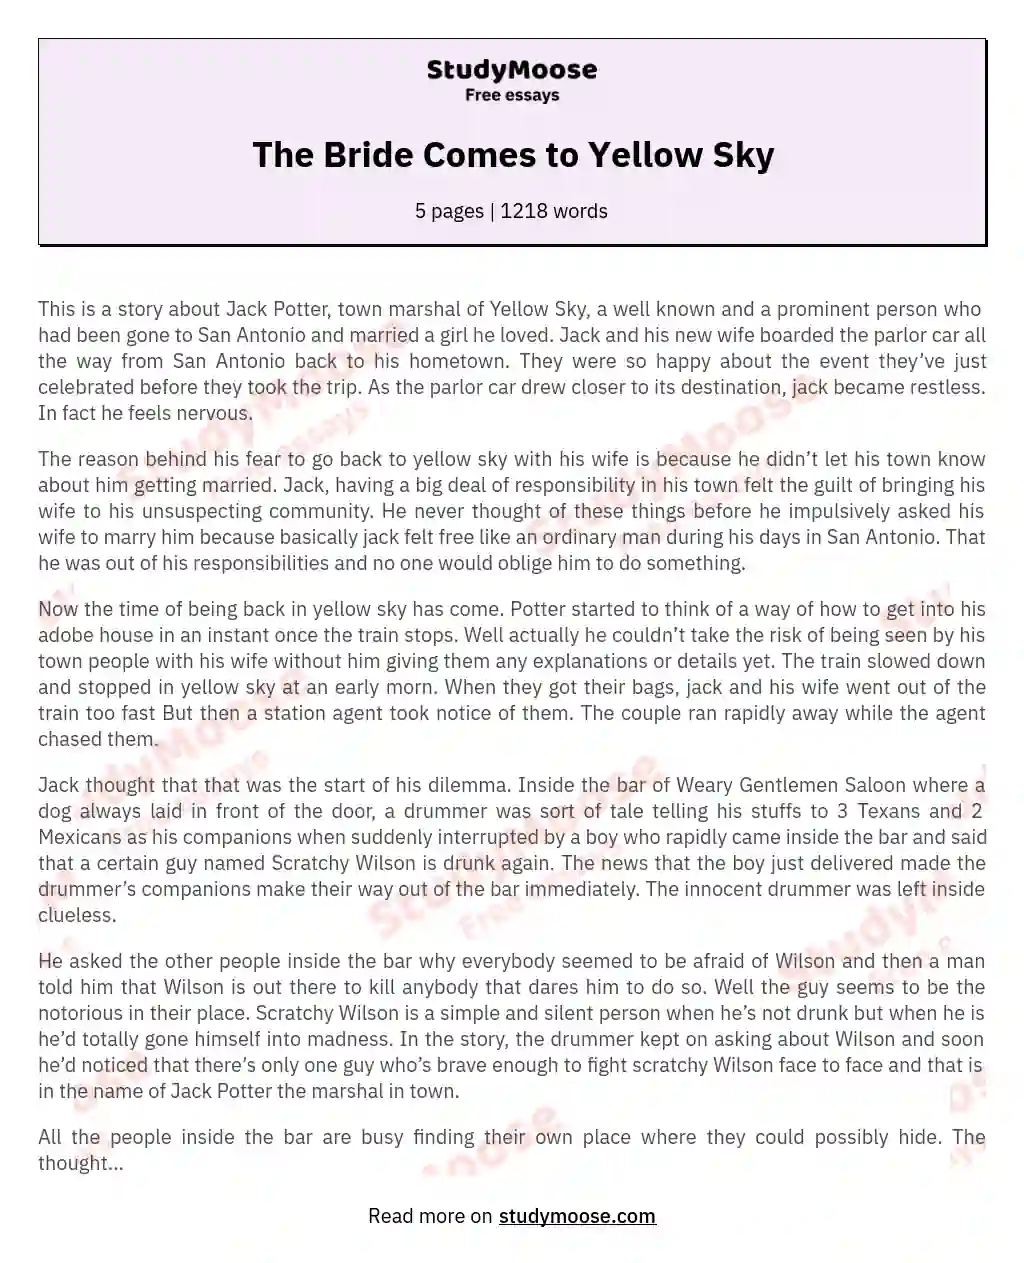 The Bride Comes to Yellow Sky essay